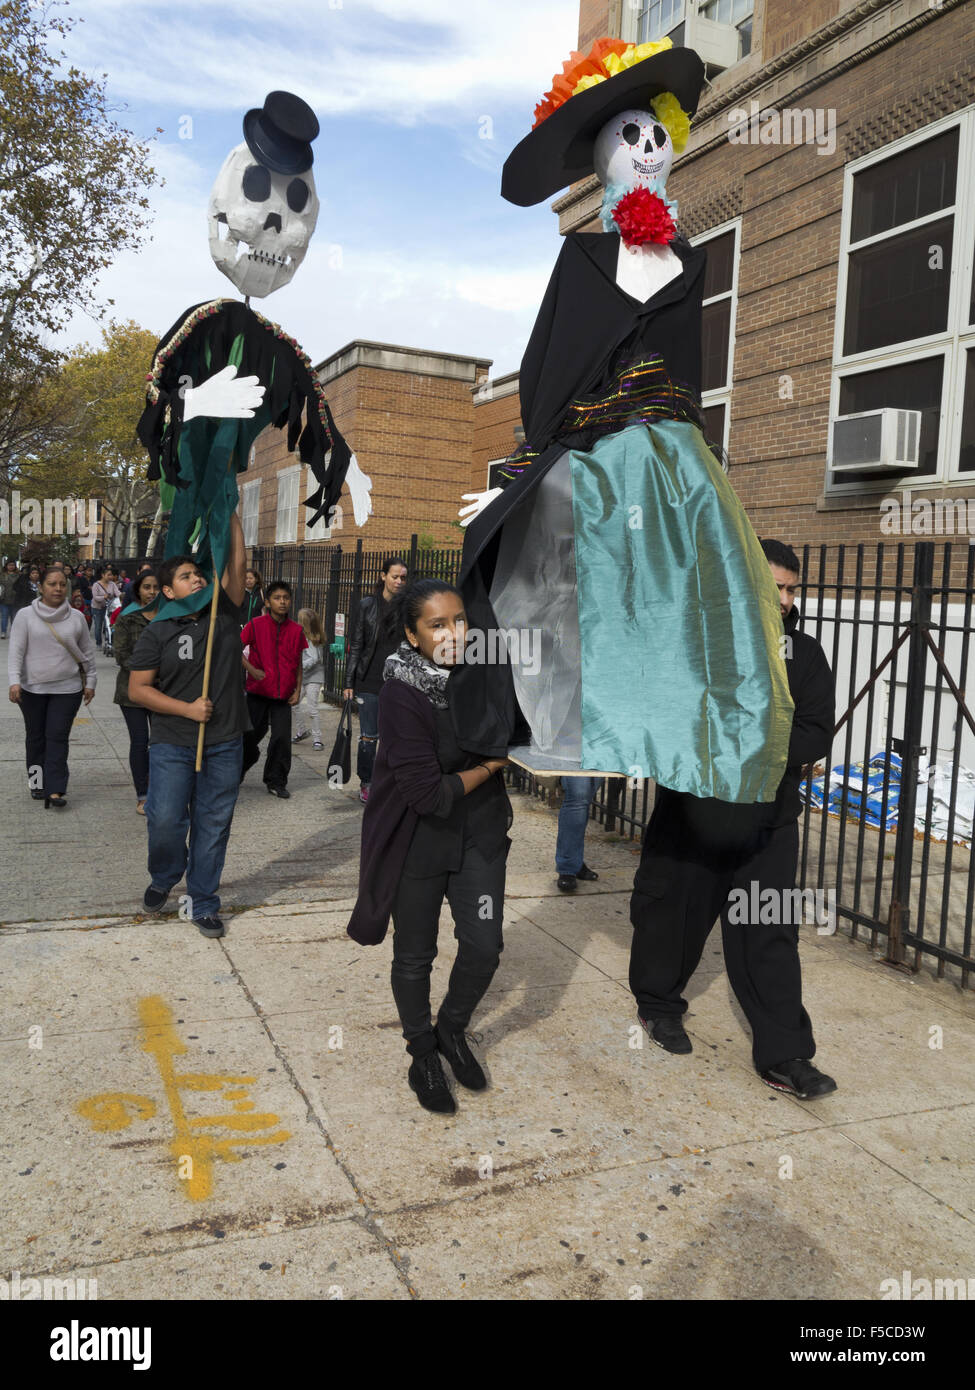 Giant puppets lead procession at Day of the Dead Festival in the Kensington section of Brooklyn, NY, Nov.1, 2015. Stock Photo